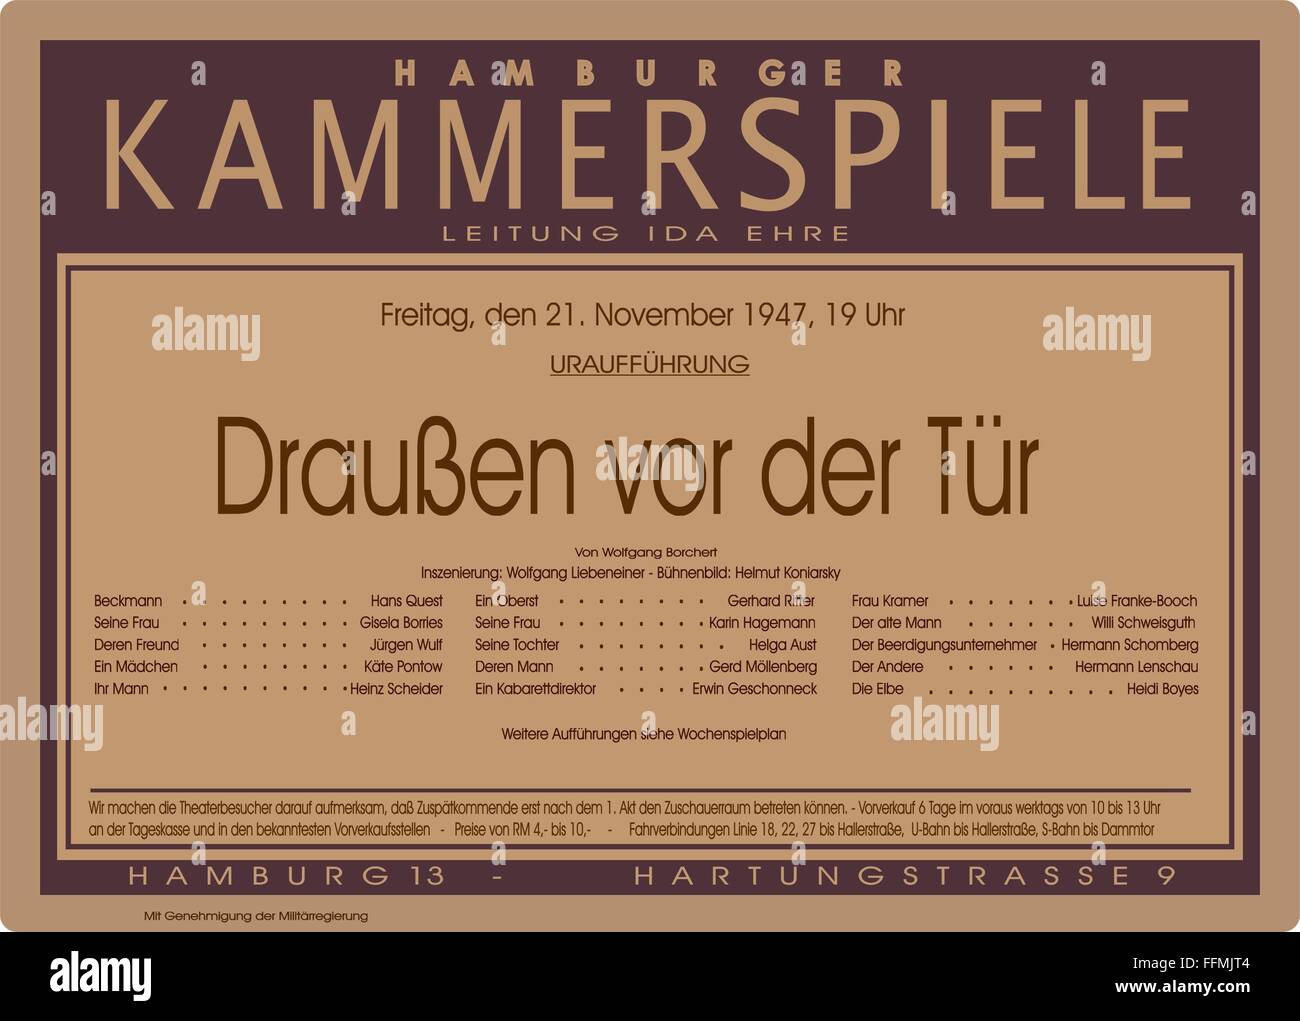 theatre, play, 'Draussen vor der Tuer' (The Man Outside) by Wolfgang Borchert, poster of the world premiere, Kammerspiele, Hamburg, 21.11.1947, Additional-Rights-Clearences-Not Available Stock Photo